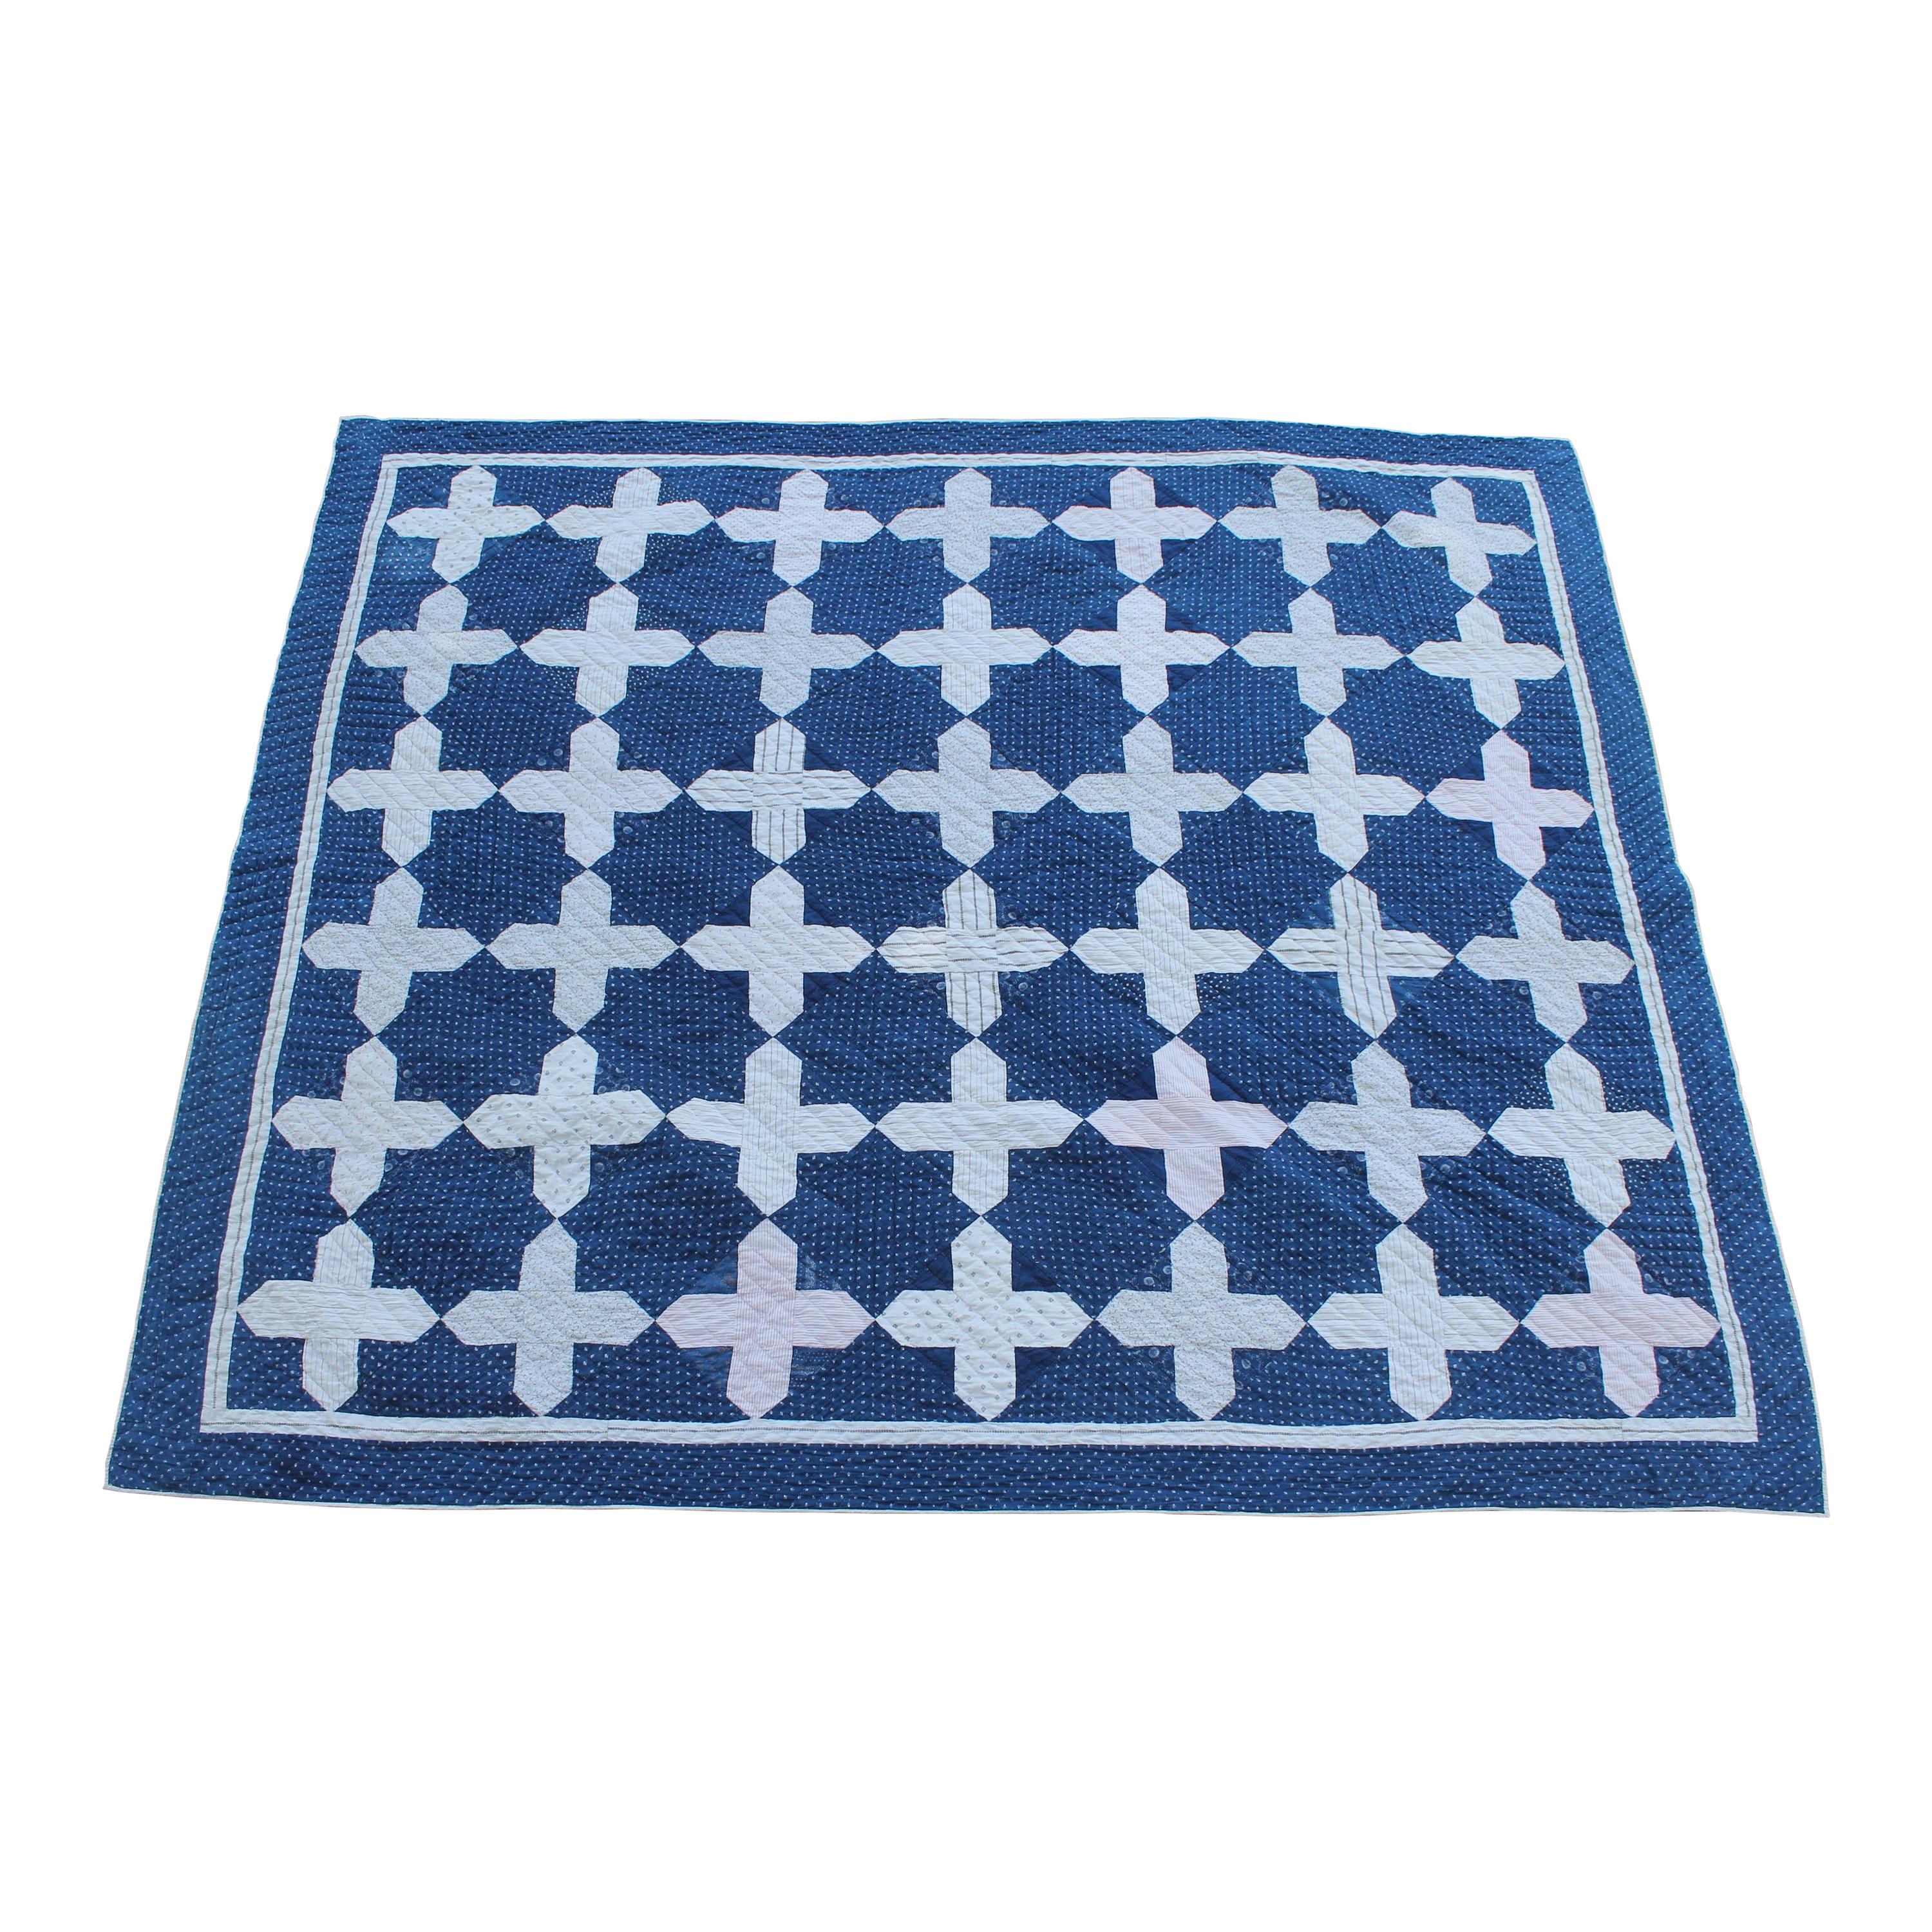 Early Antique Quilt, 19th Century Blue and White Calico Quilt